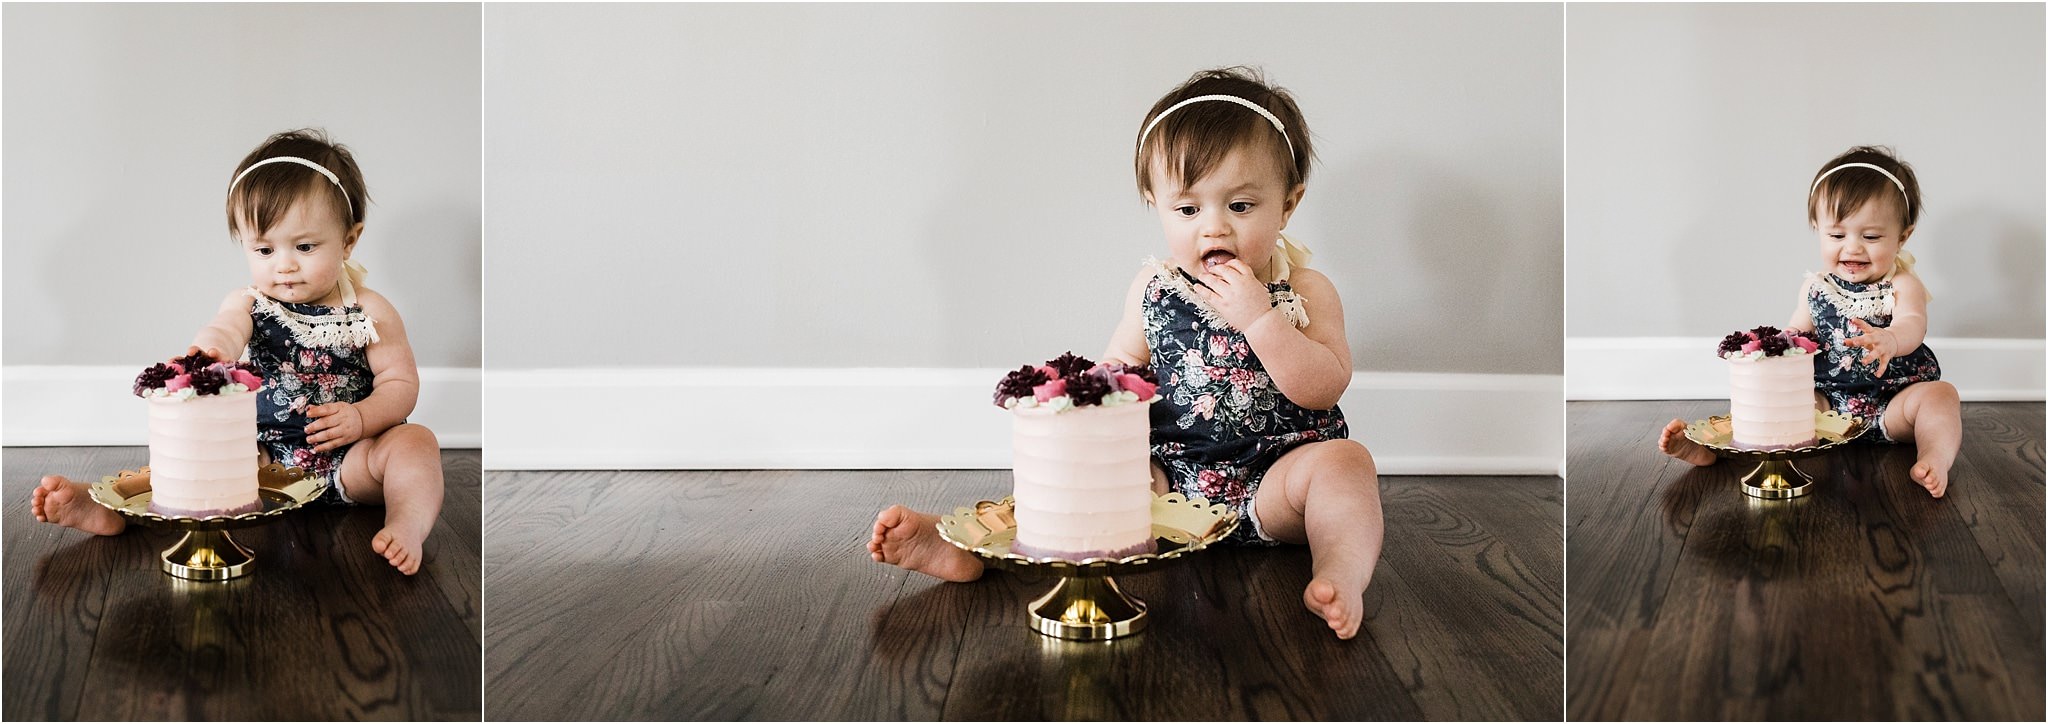 ONE YEAR OLD FLORAL SMASH CAKE AND ROMPER PHOTOS